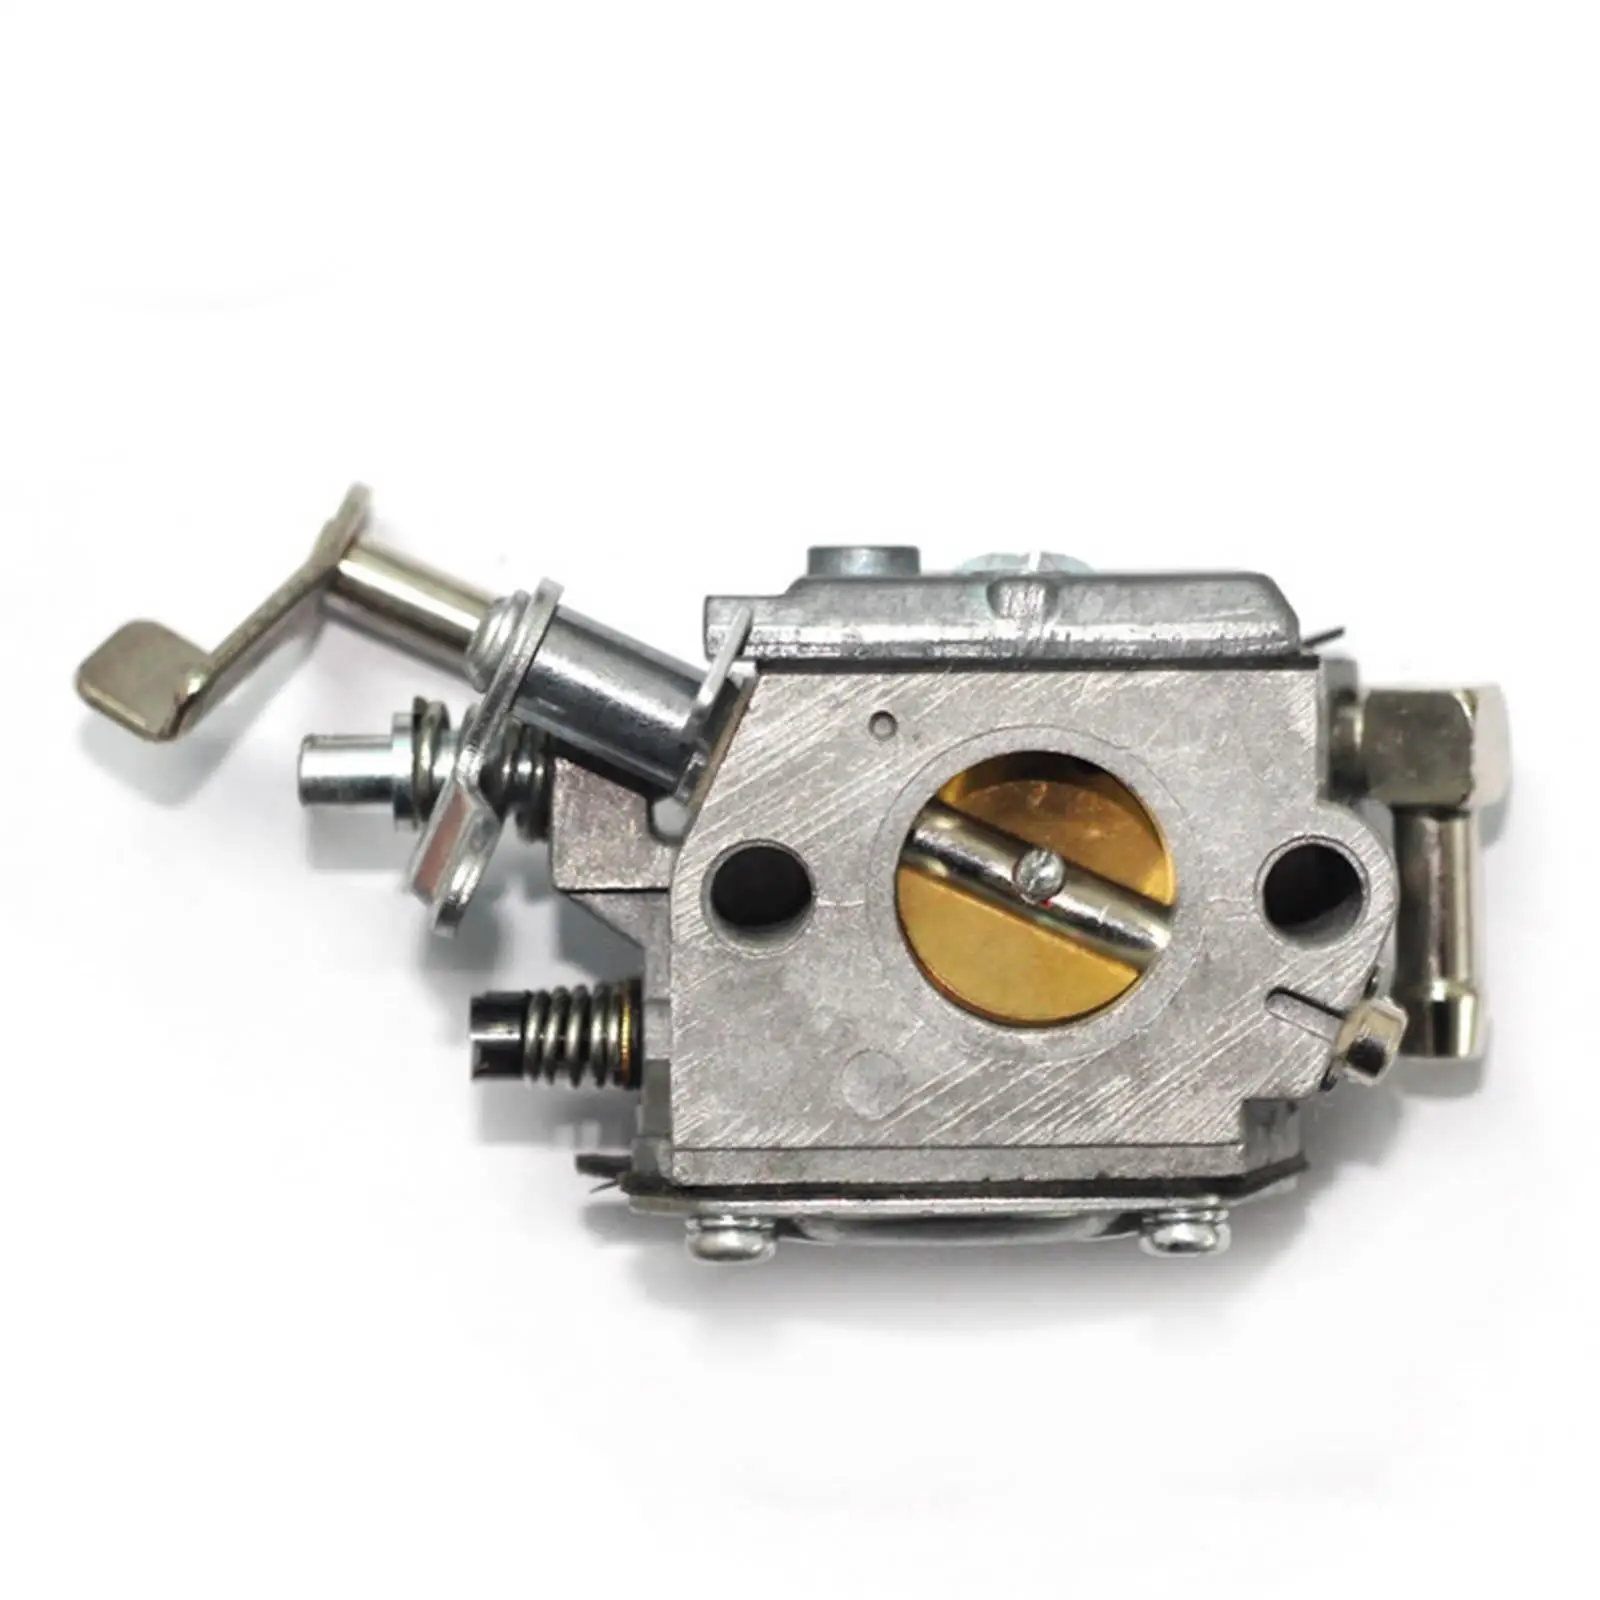 Carburetor Gx100 Direct Replaces Carb Air Filter Assembly for Gx100 16100-Z0D-V02 Easy to Install Durable Professional